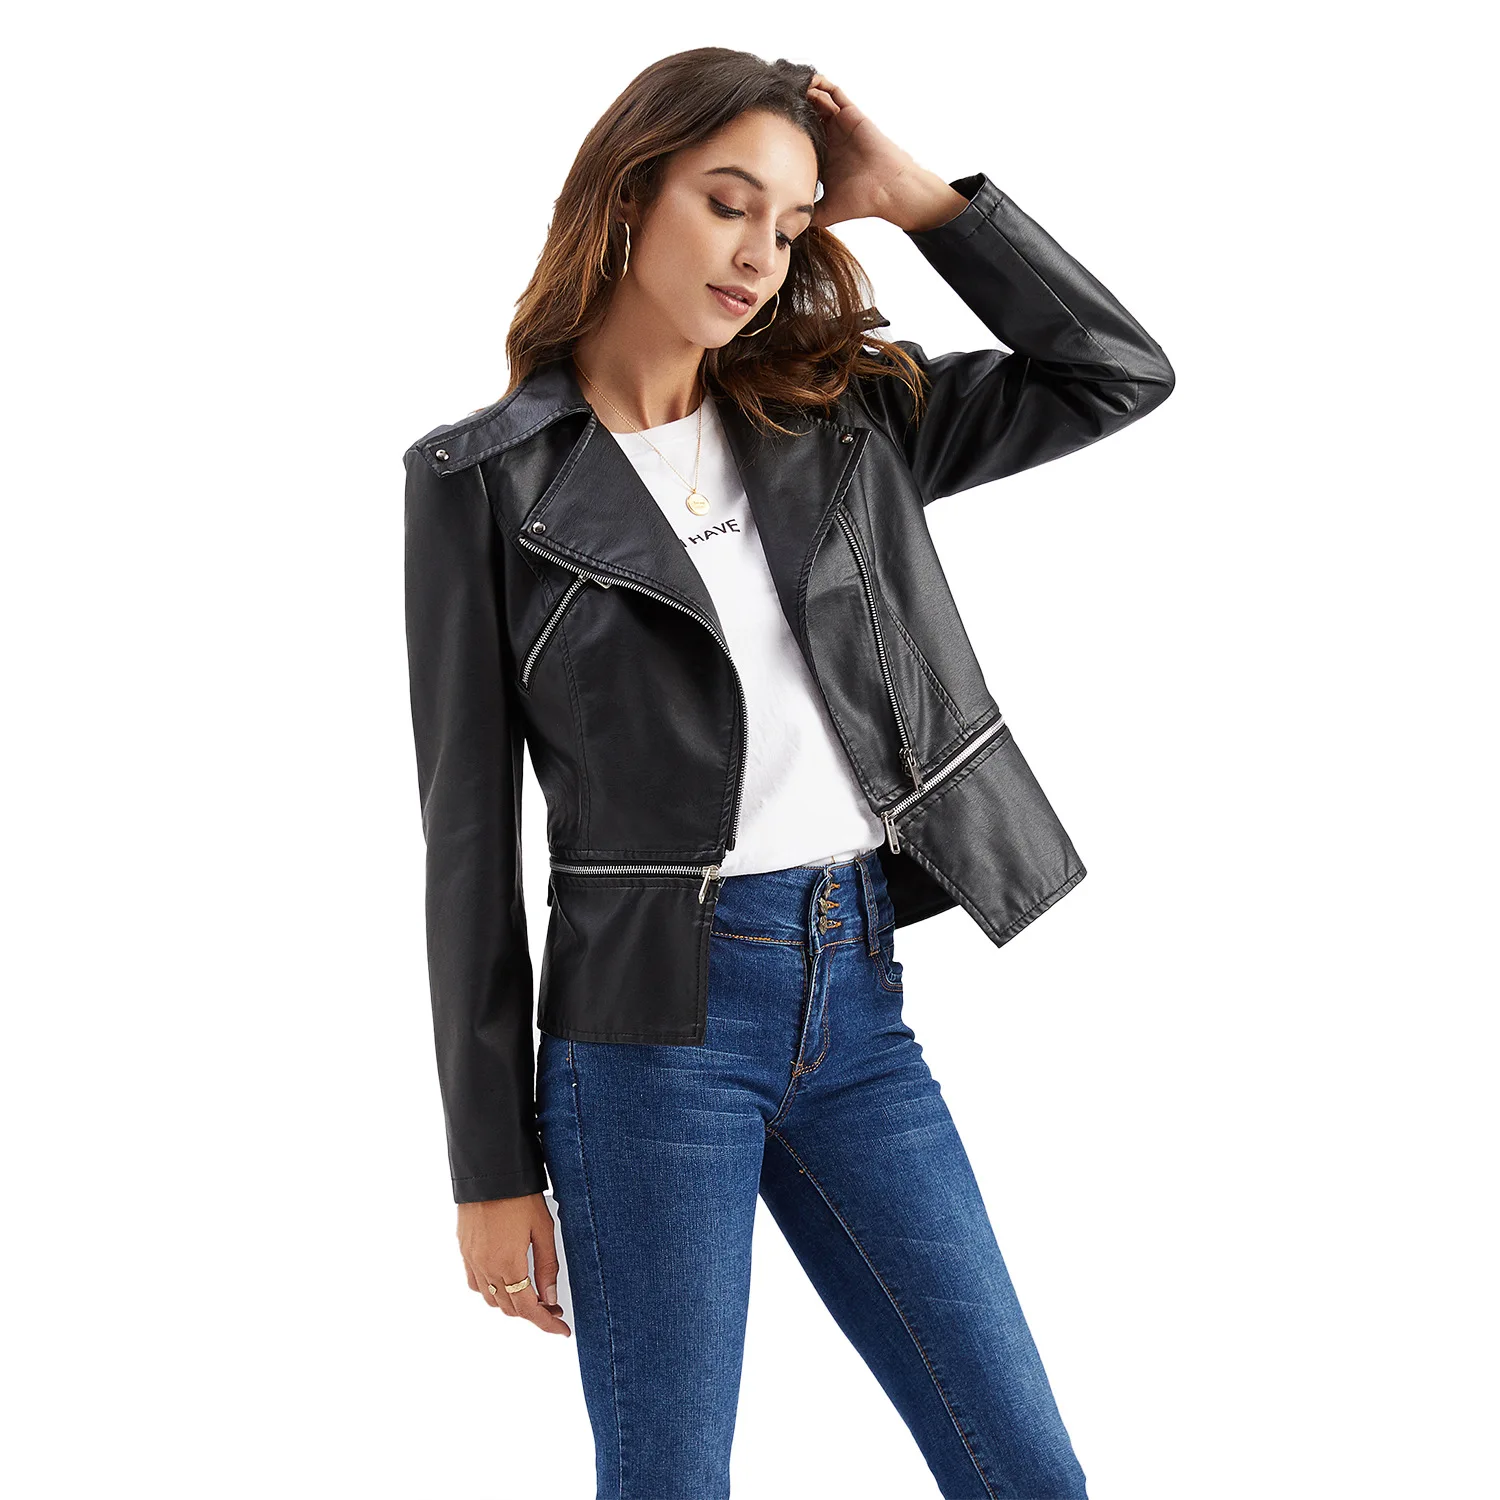 Women's Leisure Hem Detachable Leather Jacket, Spring and Autumn Coat, European and American Fashion, High-Quality Lapel Zipper,